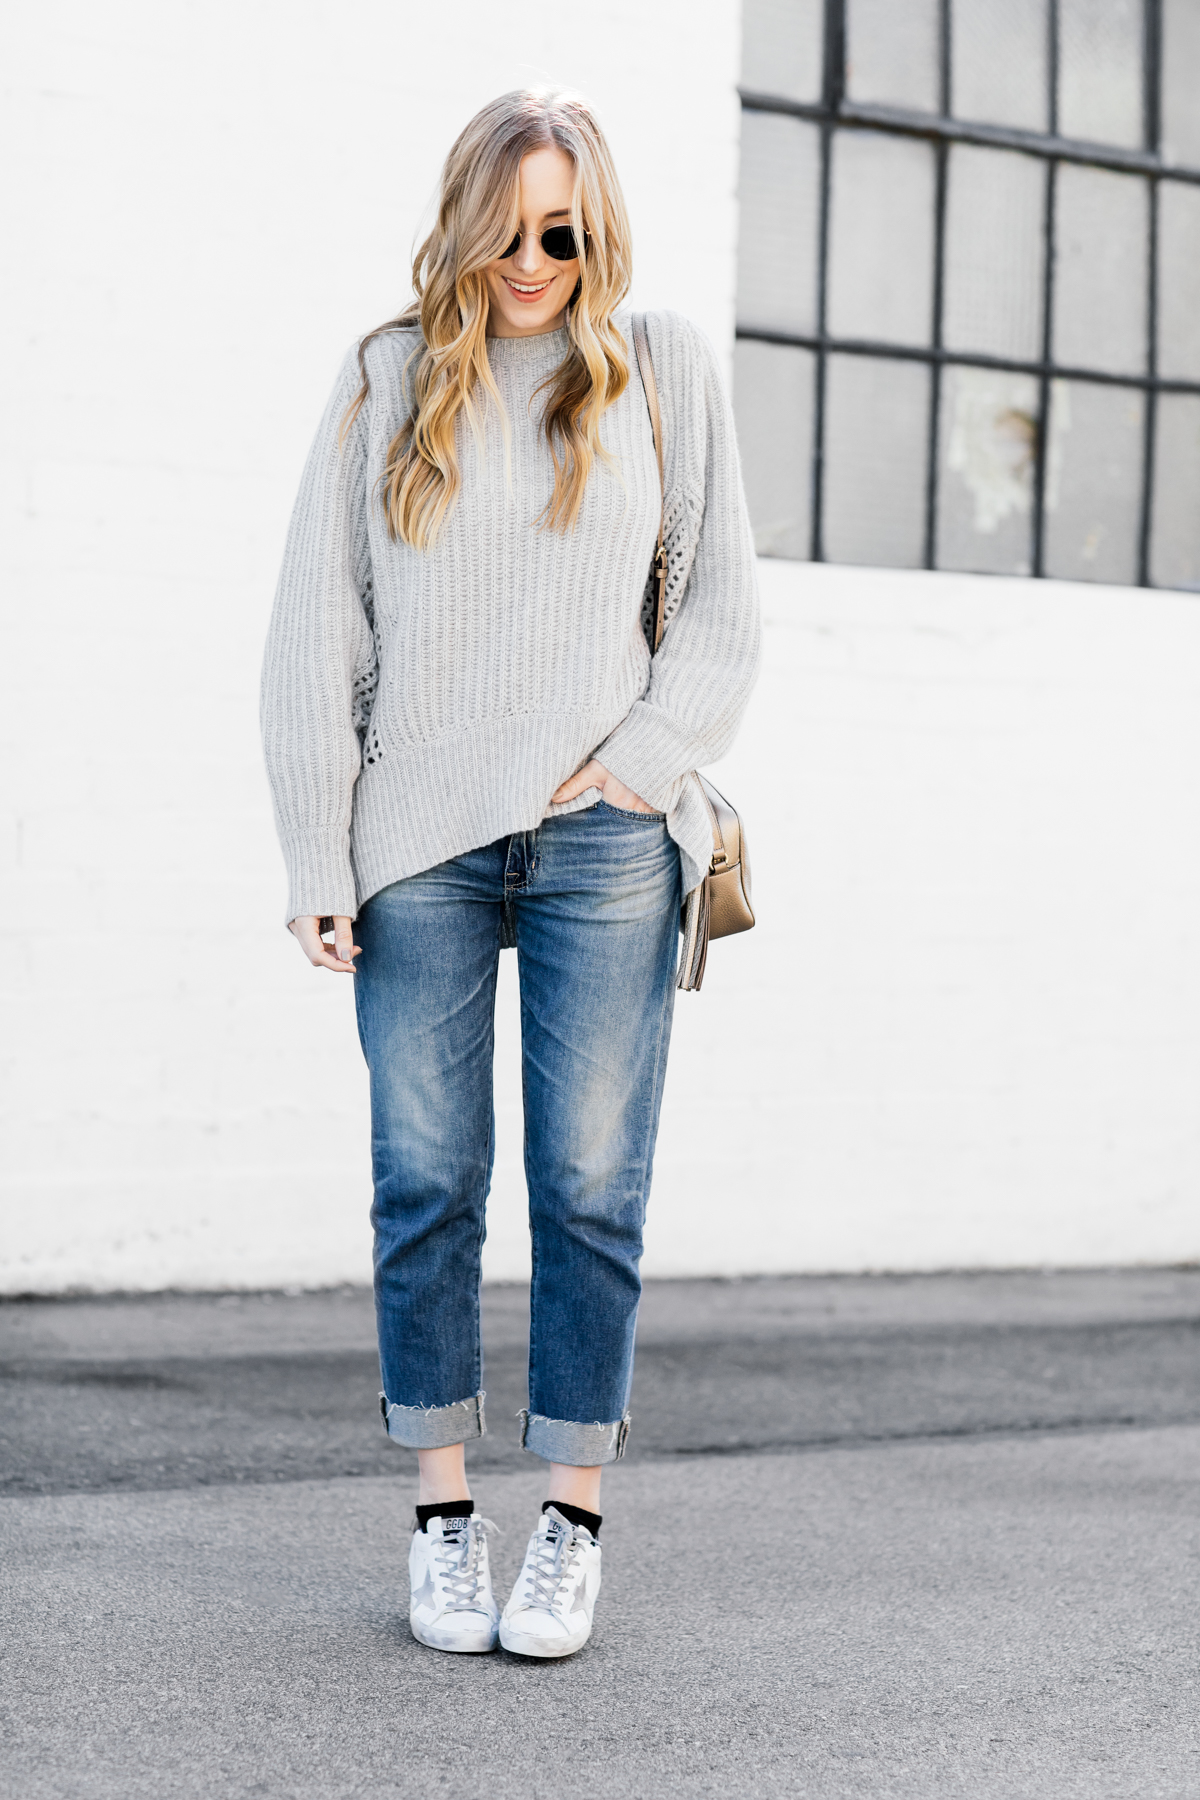 eatsleepwear, Kimberly Lapides, OUTFIT, Rag And Bone, Ag Jeans, Gucci, Ray-ban, Golden Goose